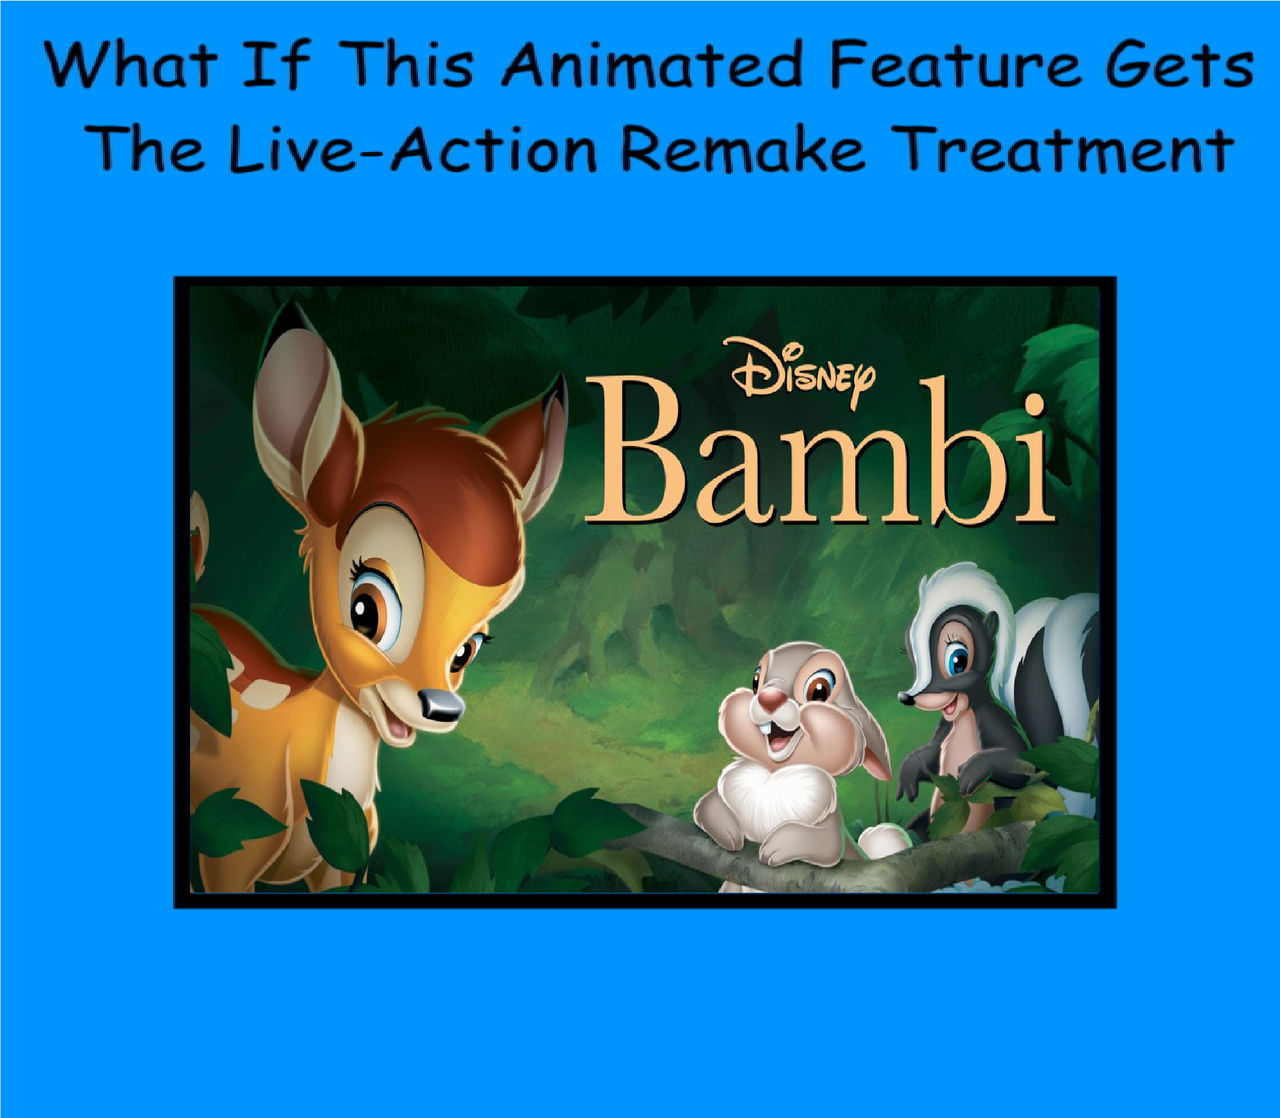 What if Bambi gets a Live-Action Remake by Disneyponyfan on DeviantArt